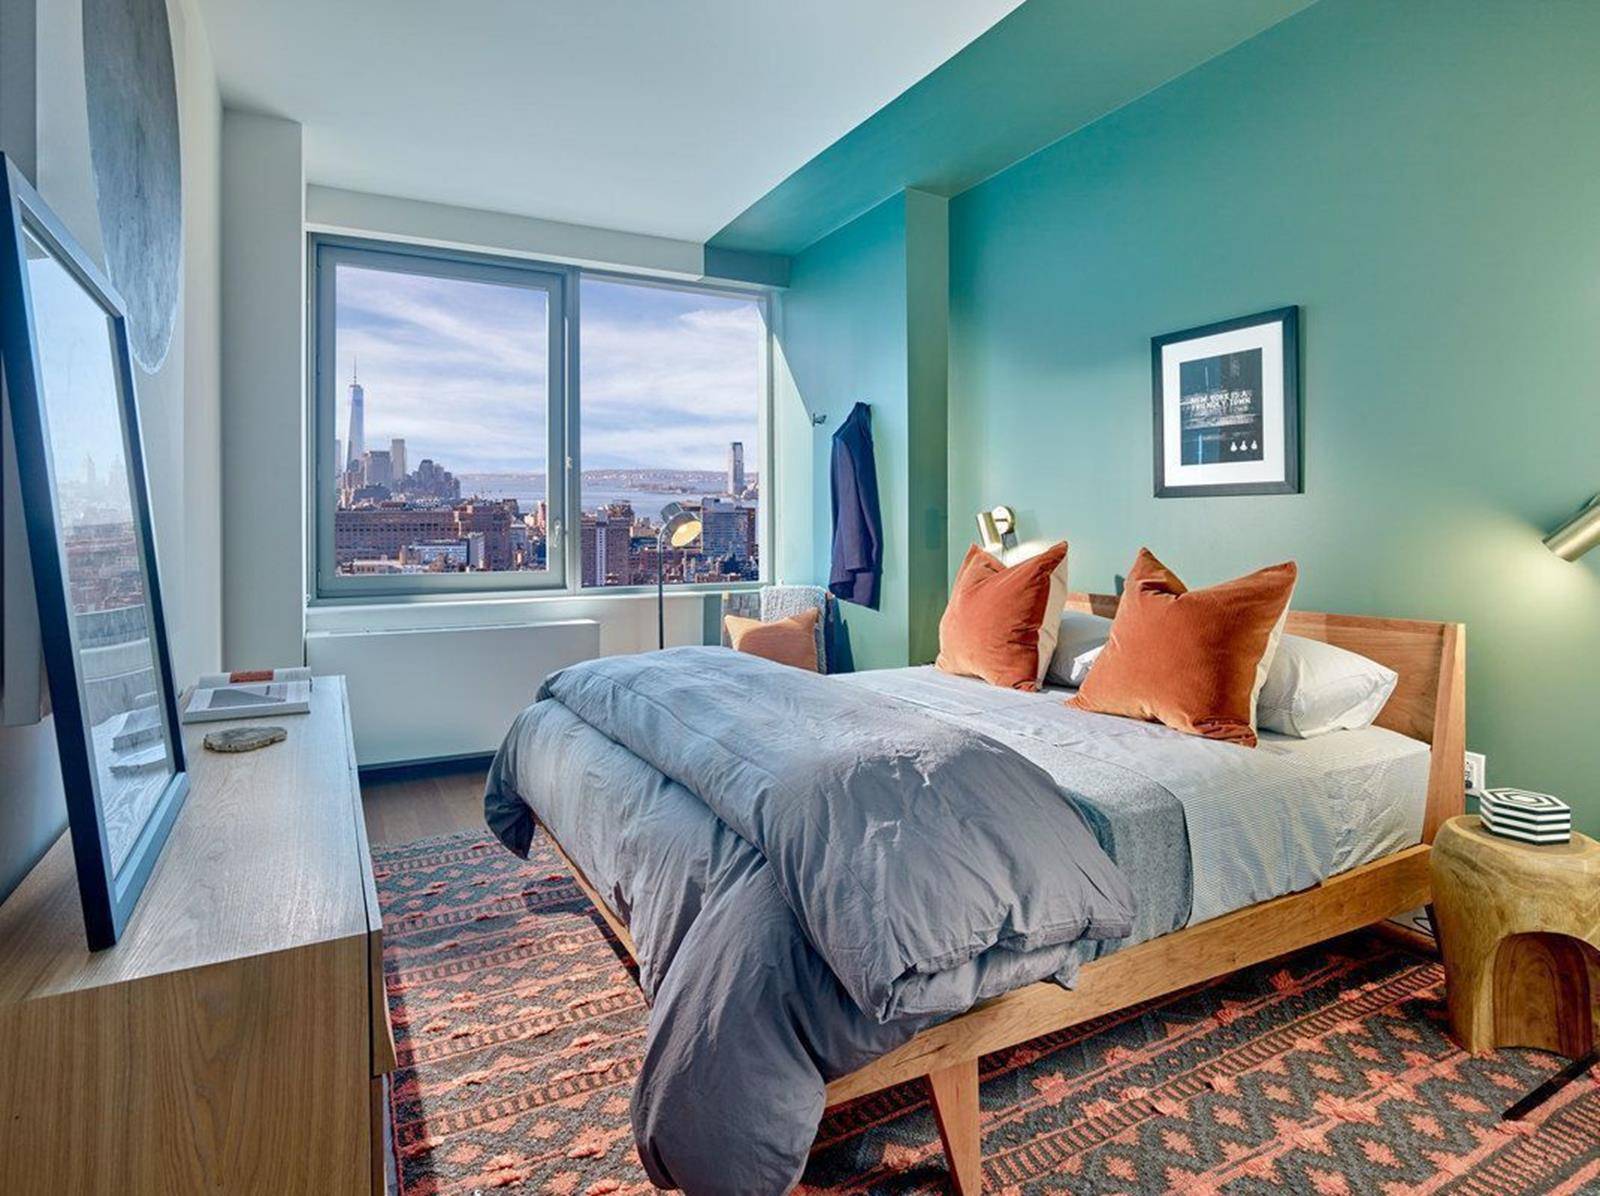 No fee apartments offering two months free on select homes The Eugene, Manhattan West s newest luxury rental building, offers custom designed residences with first class finishes including Floor to ...